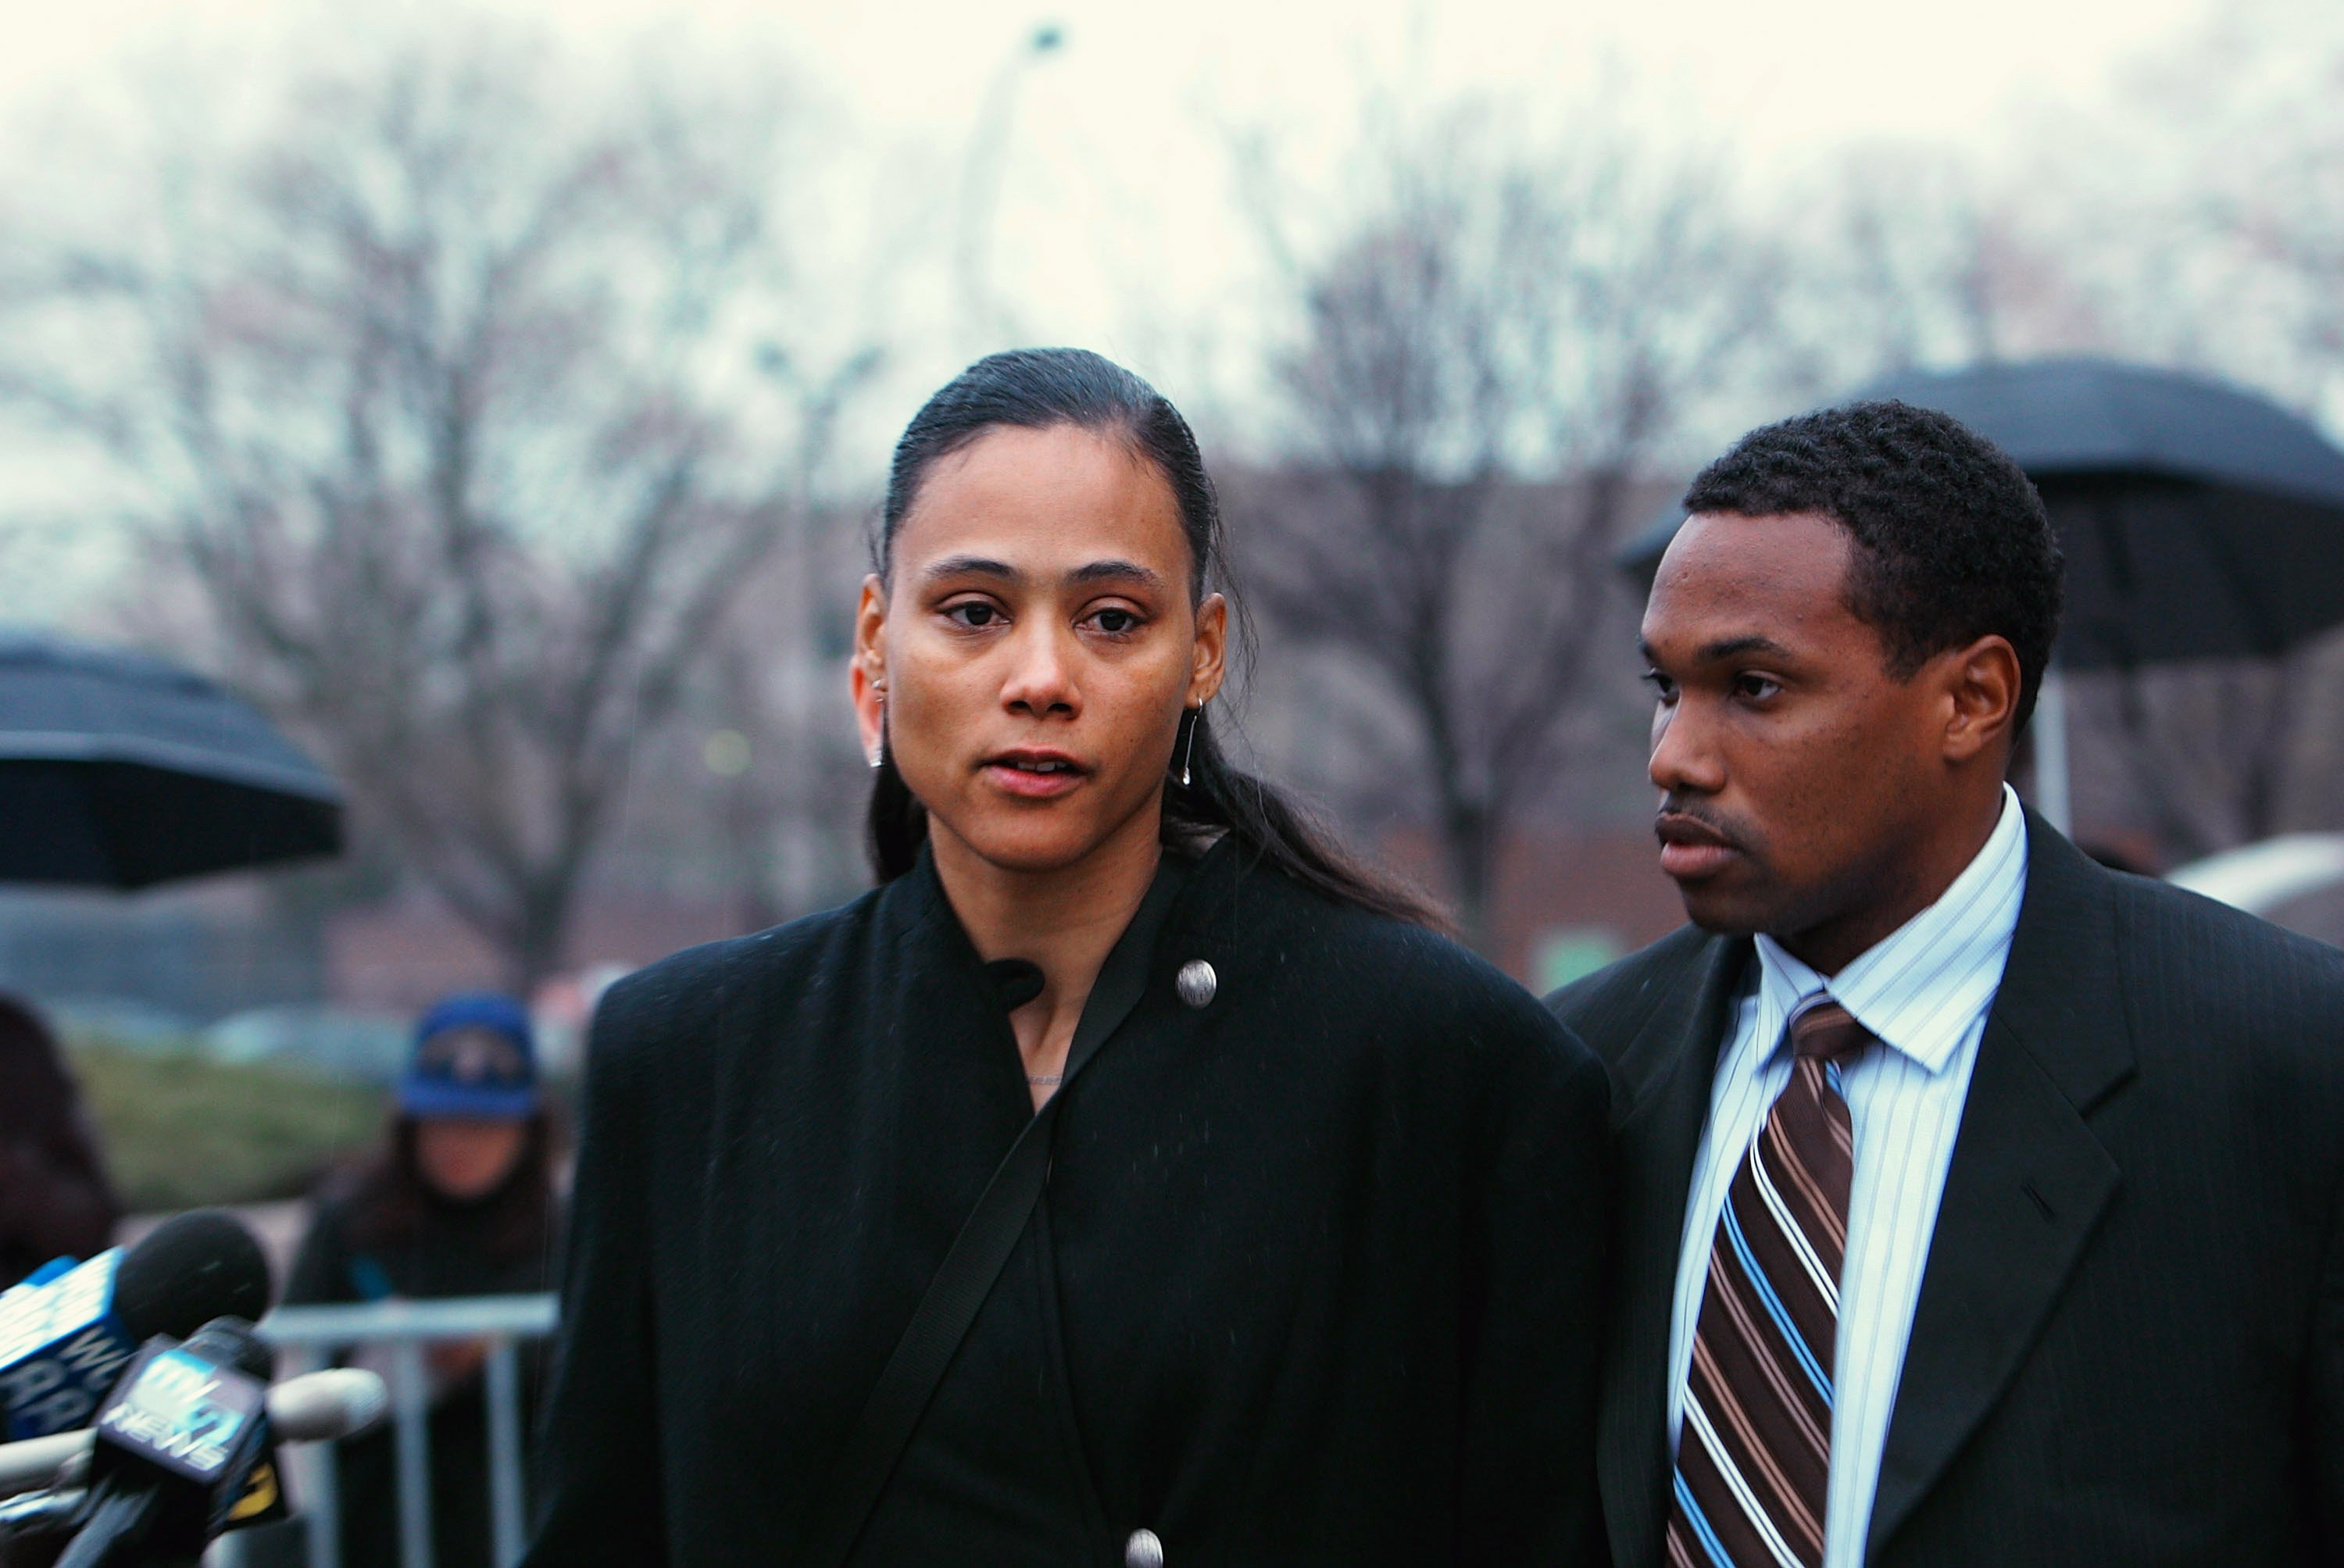 Marion Jones stands with her husband Obadele Thompson after she leaves court on January 11, 2008, in White Plains, New York | Photo: Chris Hondros/Getty Images